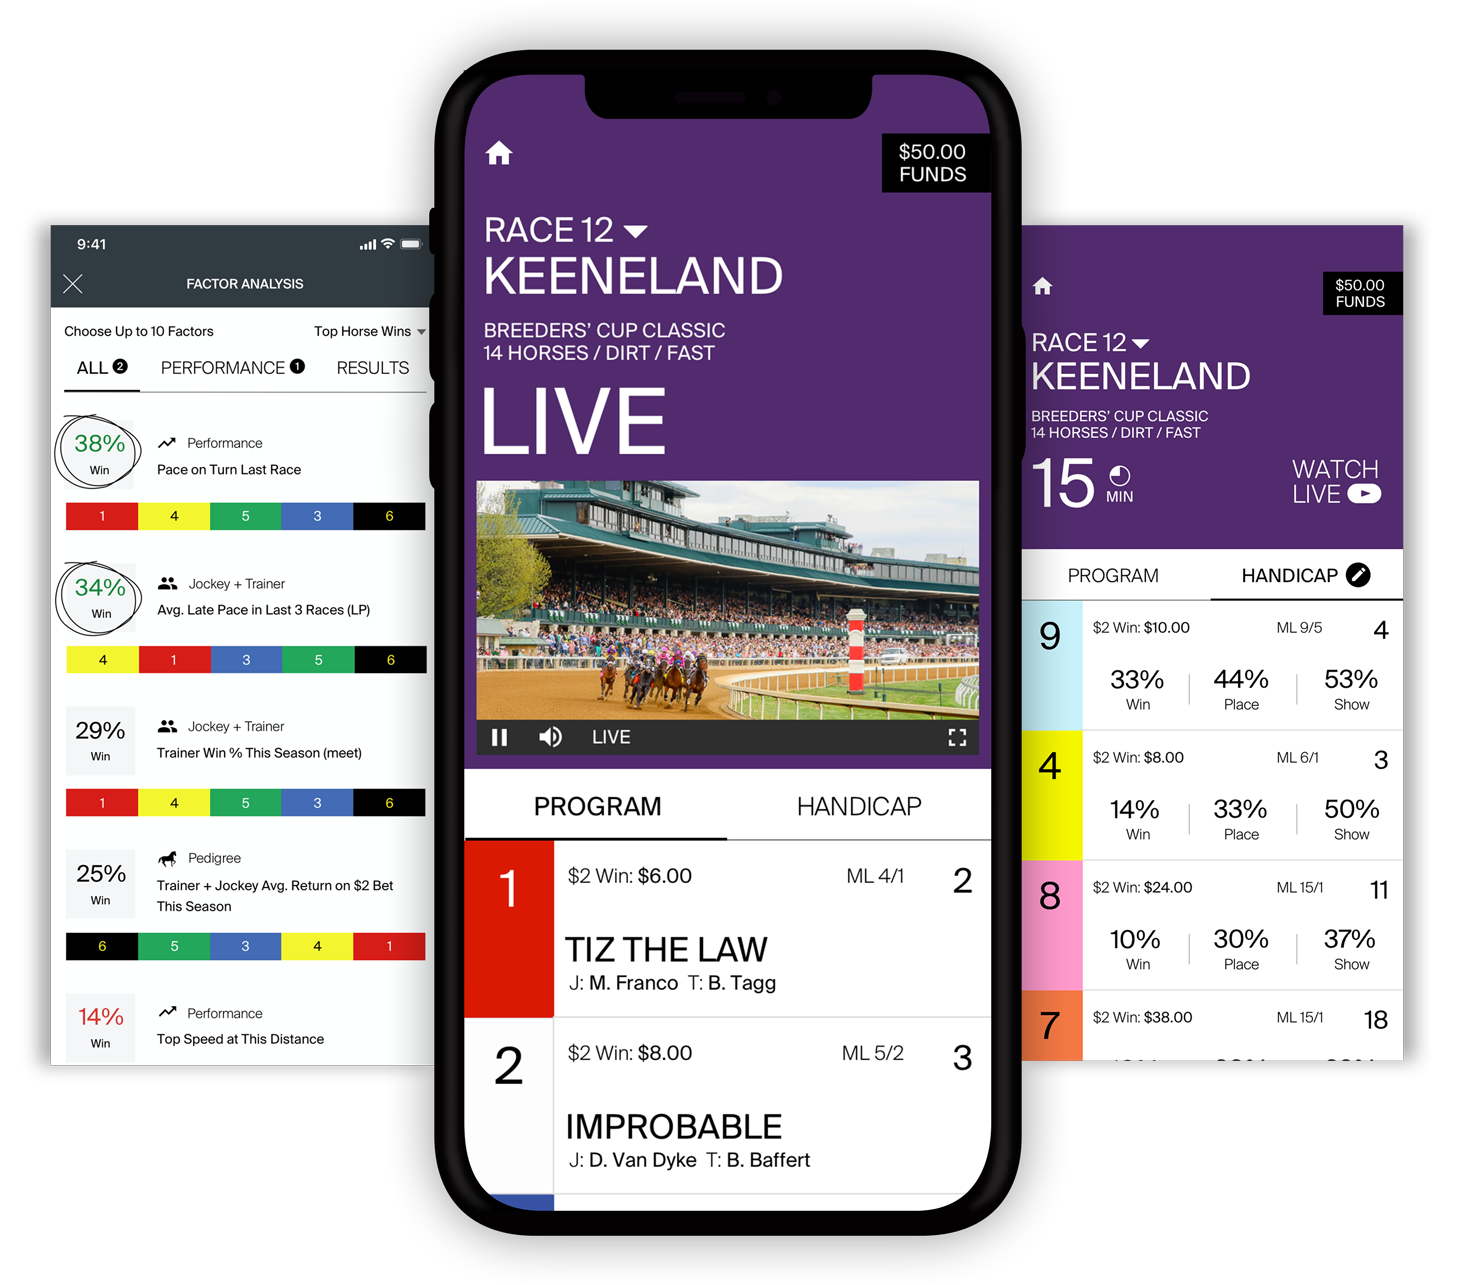 How To Get Discovered With Ipl Betting Apps